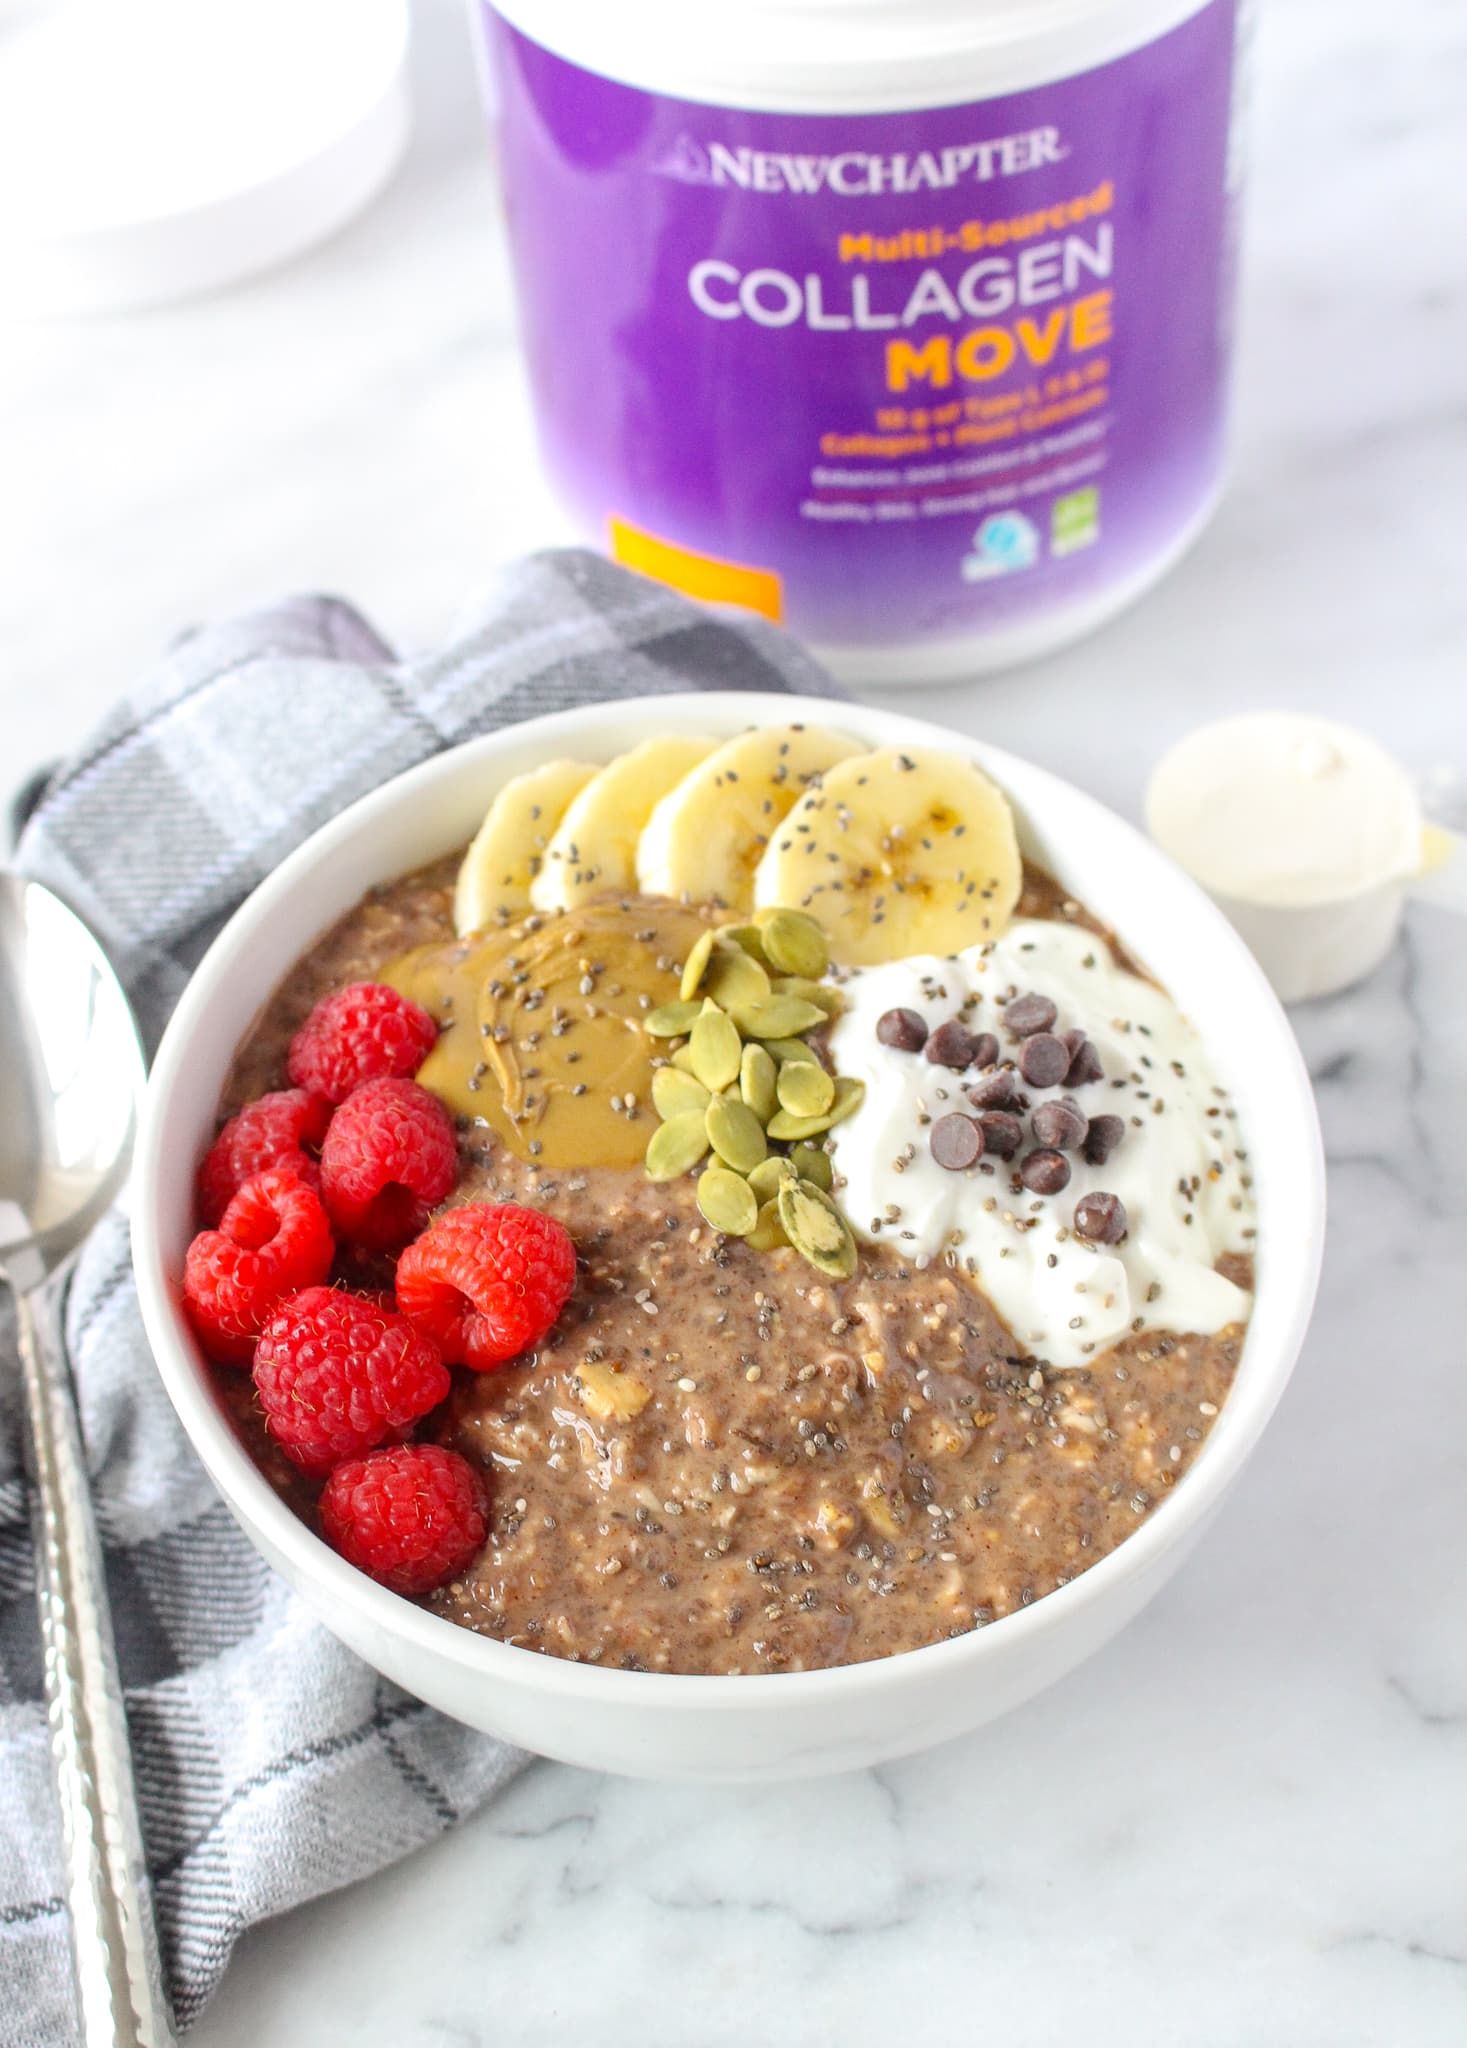 Microwave Chocolate Protein Oatmeal + How to Make Oatmeal More Filling ...